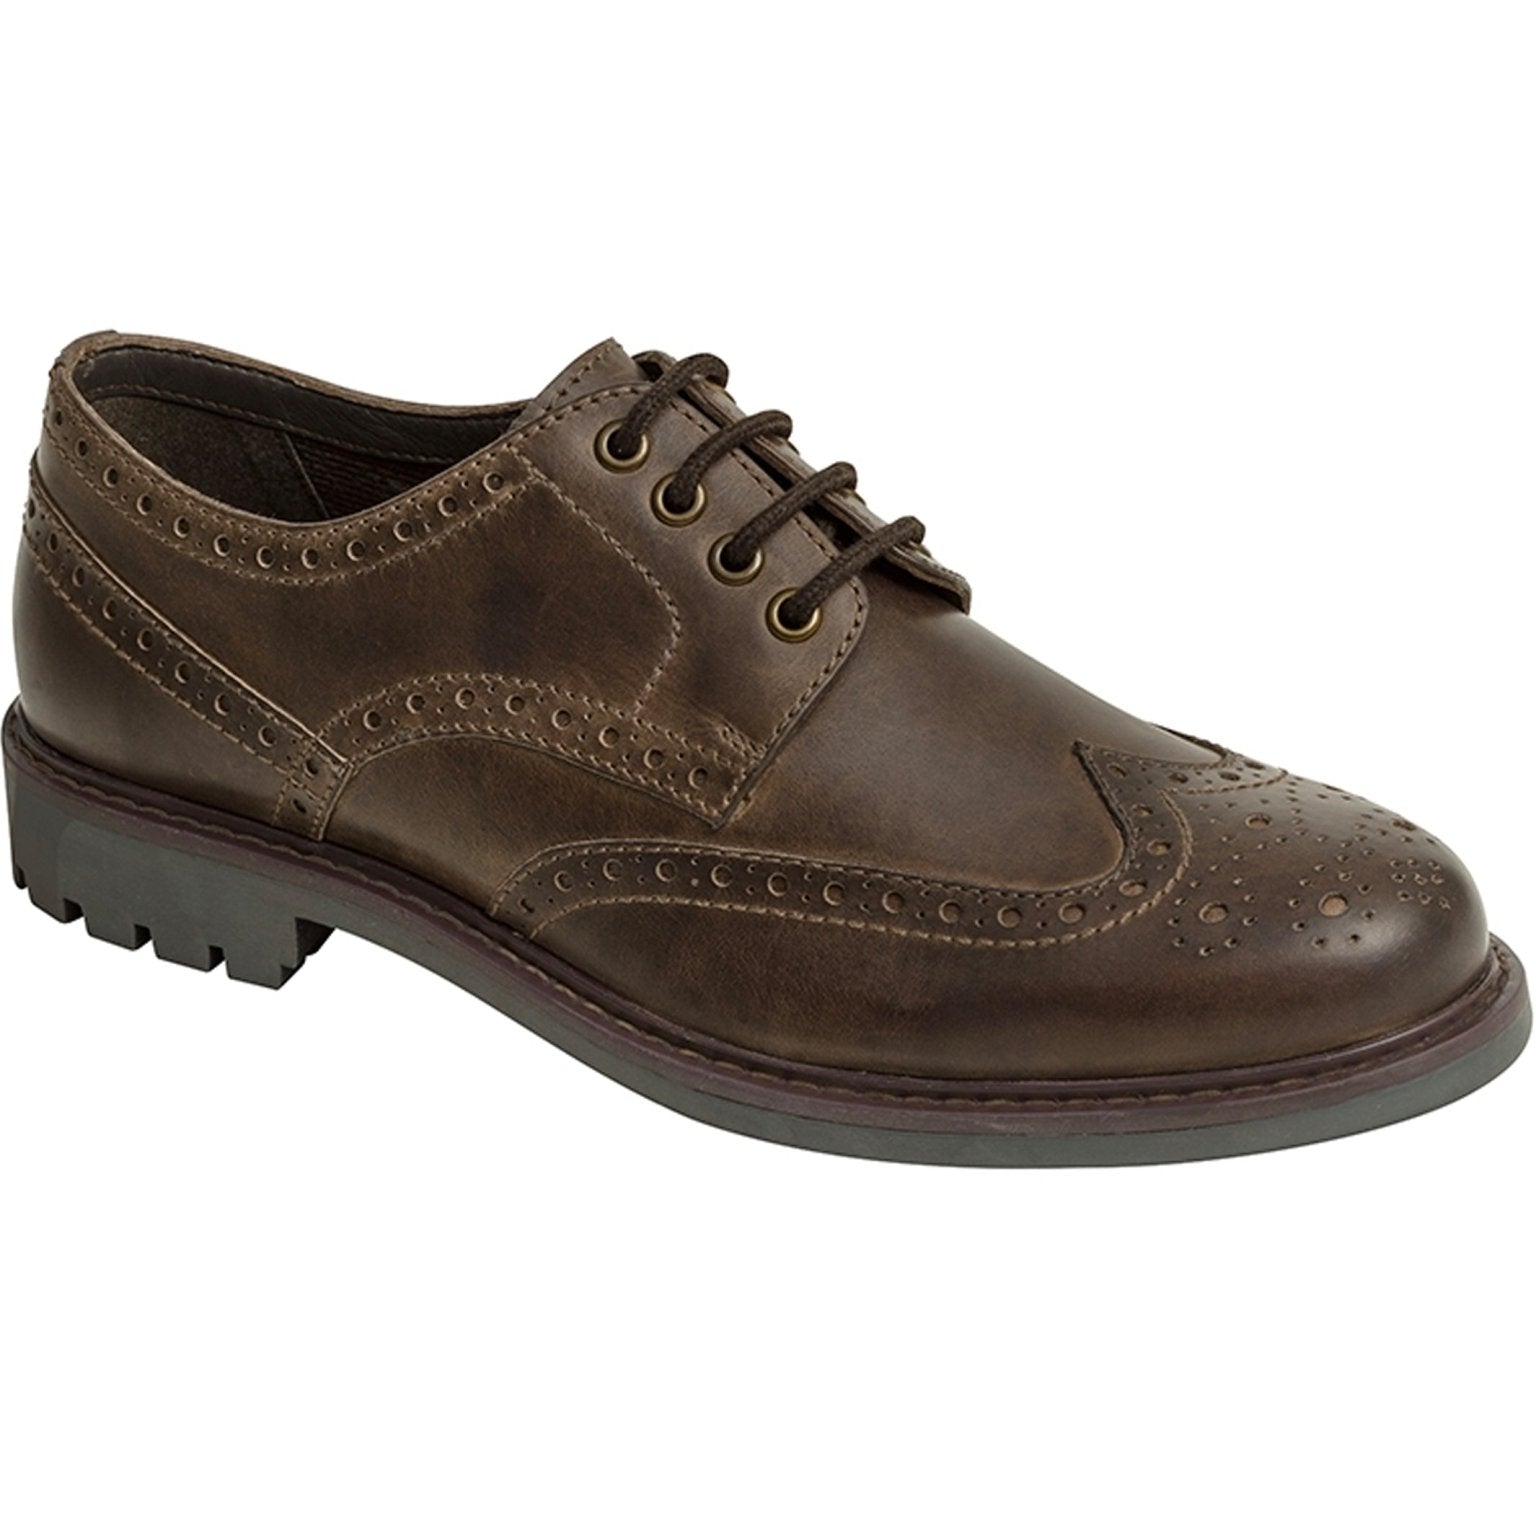 Hoggs of Fife Hoggs of Fife - Mens Brogue Shoe - Inverurie Country Brogue Full grain leather shoe Shoes